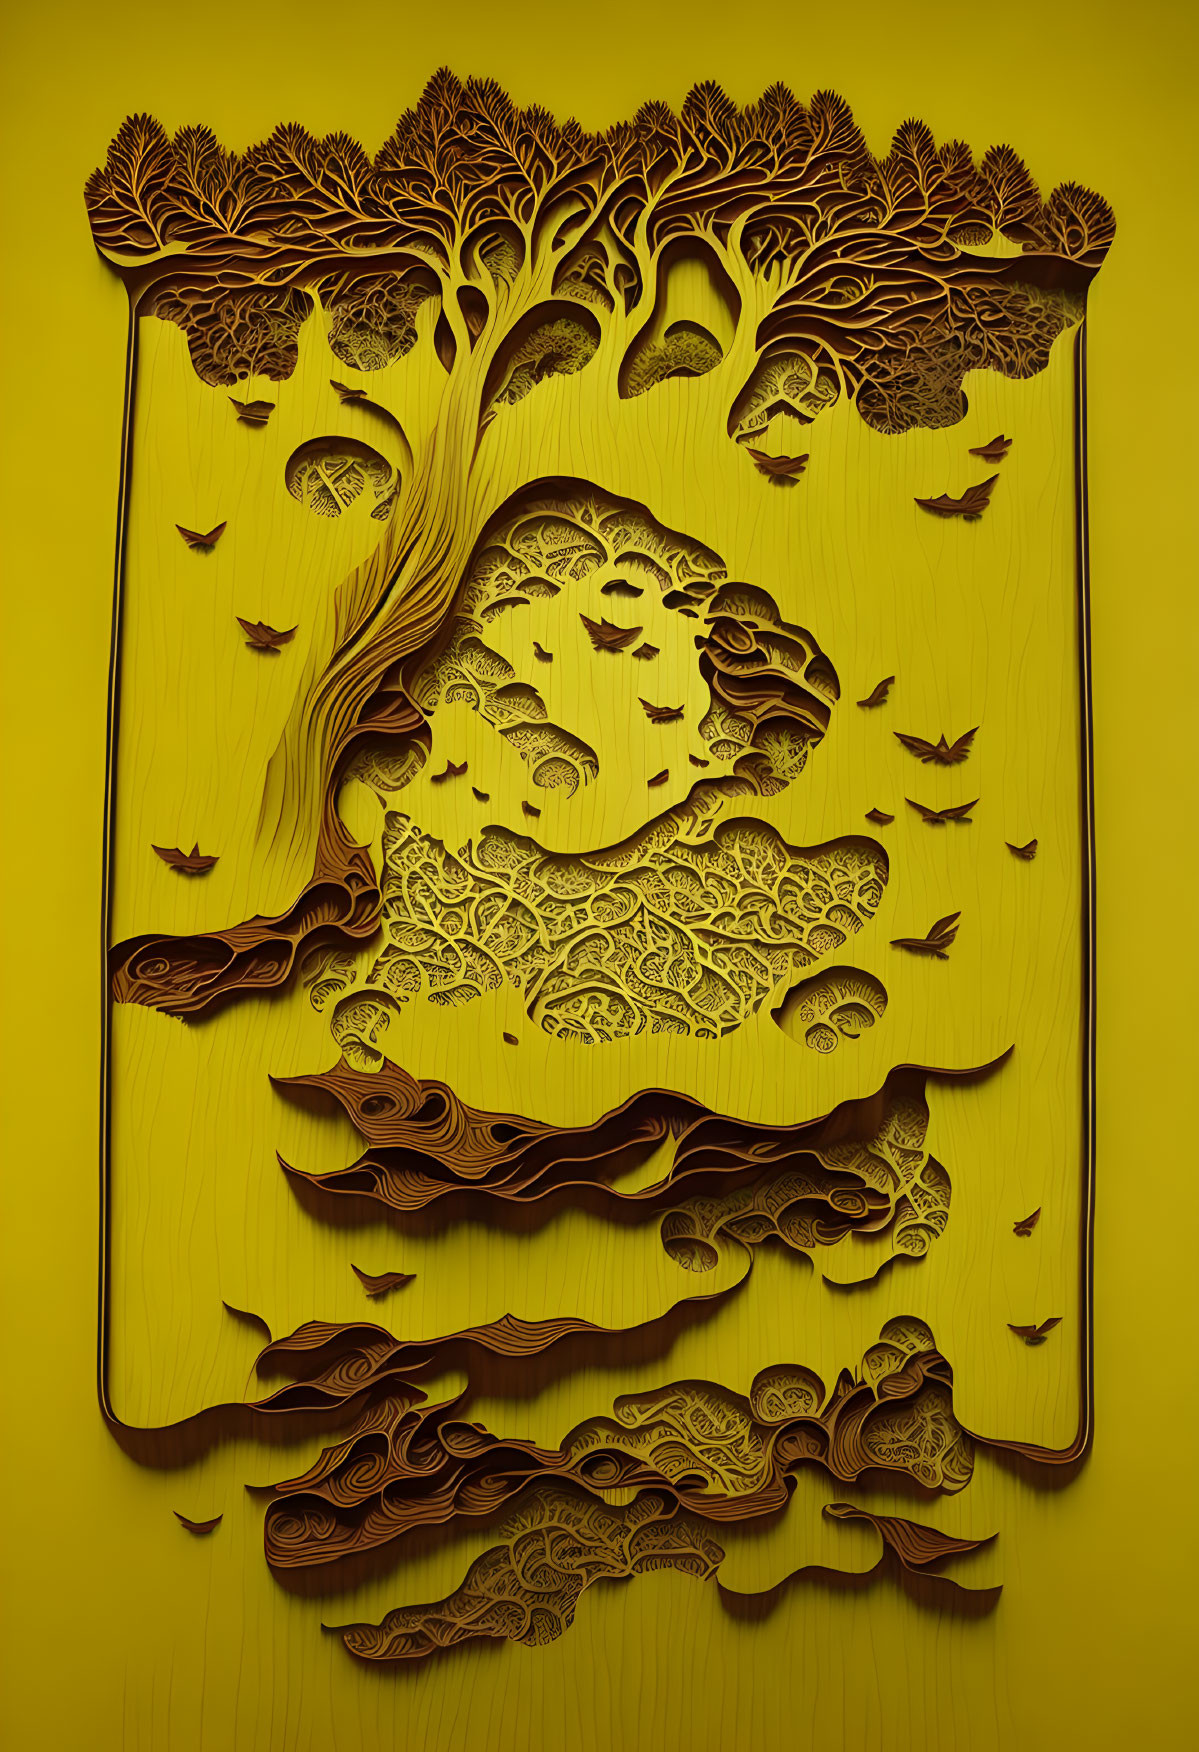 Detailed Wood Carving Art: Stylized Tree & Waves on Yellow Background